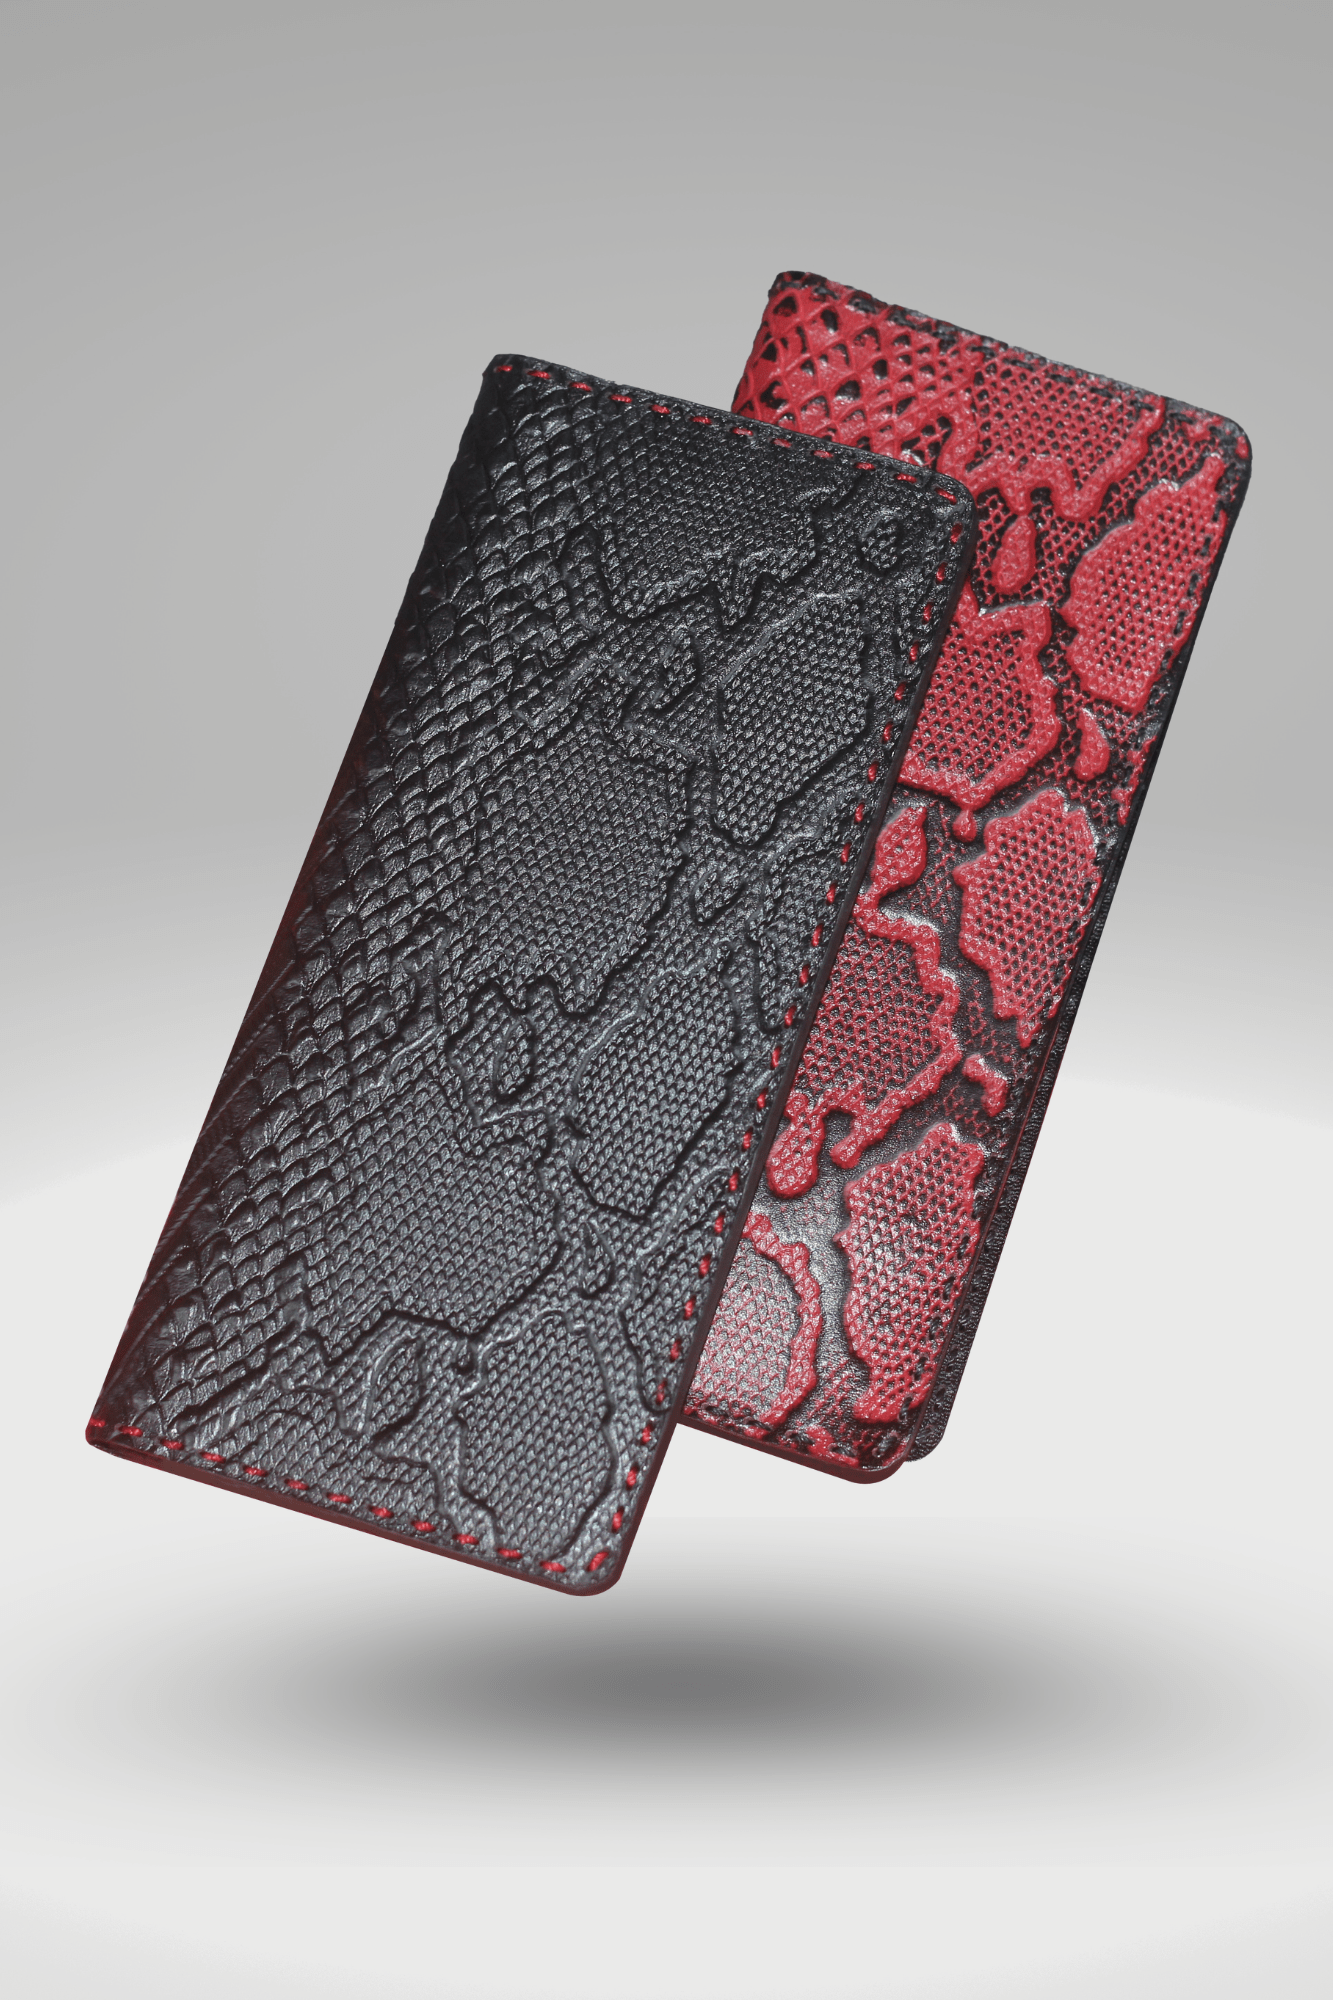 Unisex Genuine Leather Wallet With Black Hand-Tipped Maroon 7 Black Python Textured Finish